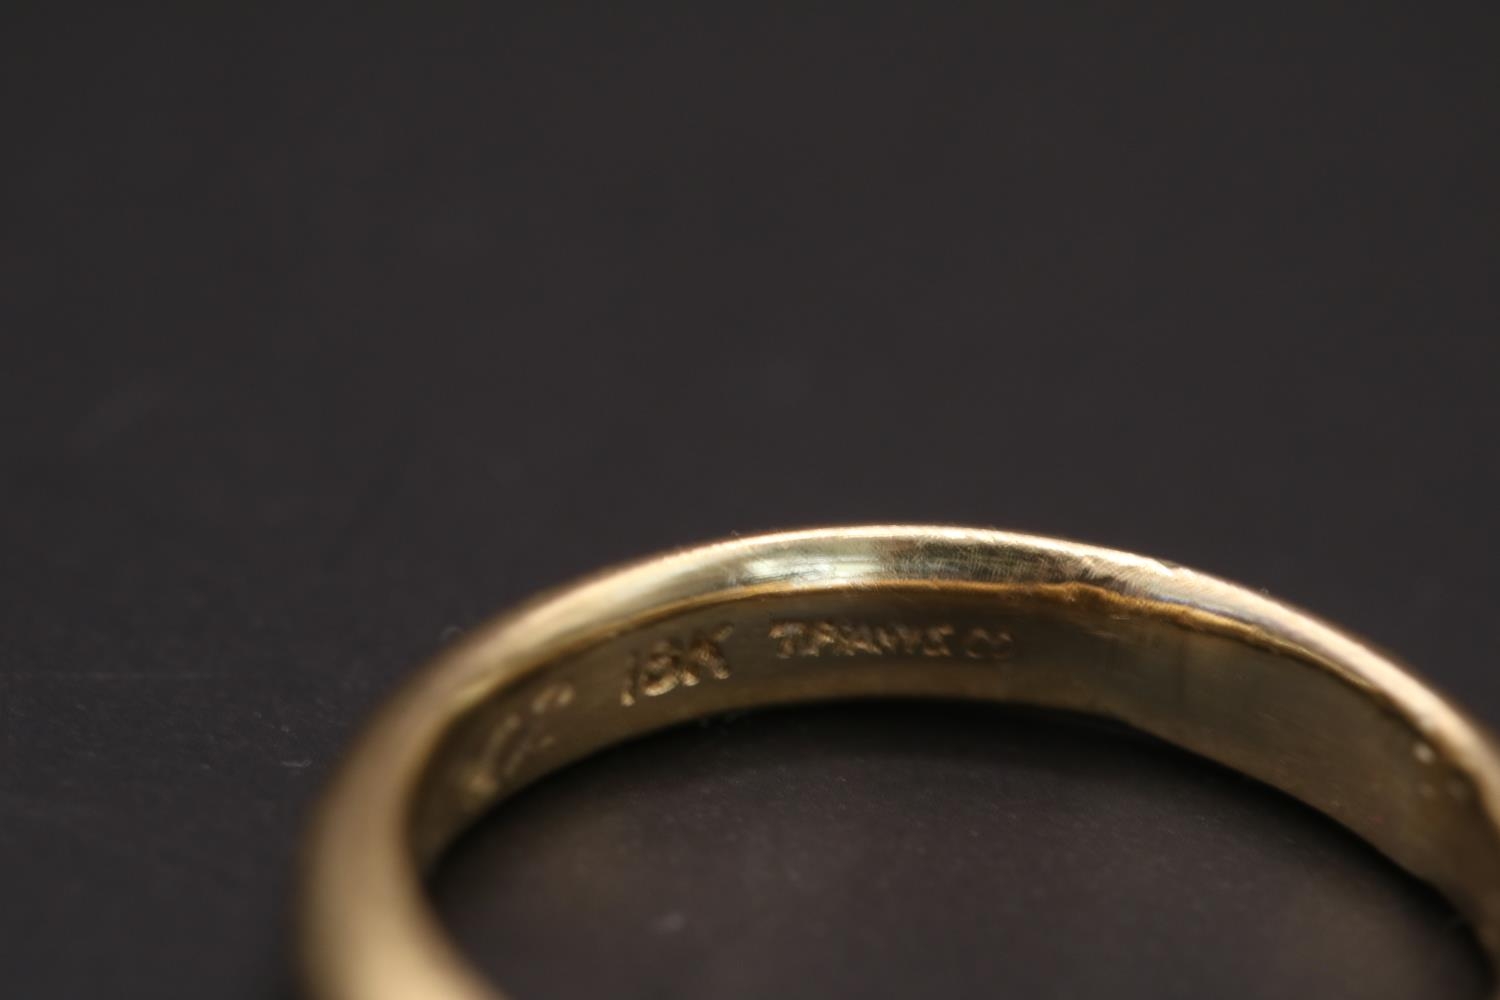 18ct Gold Tiffany & Co Court Shaped wedding band with inscription to interior. Size M, 4.4g total - Image 3 of 3